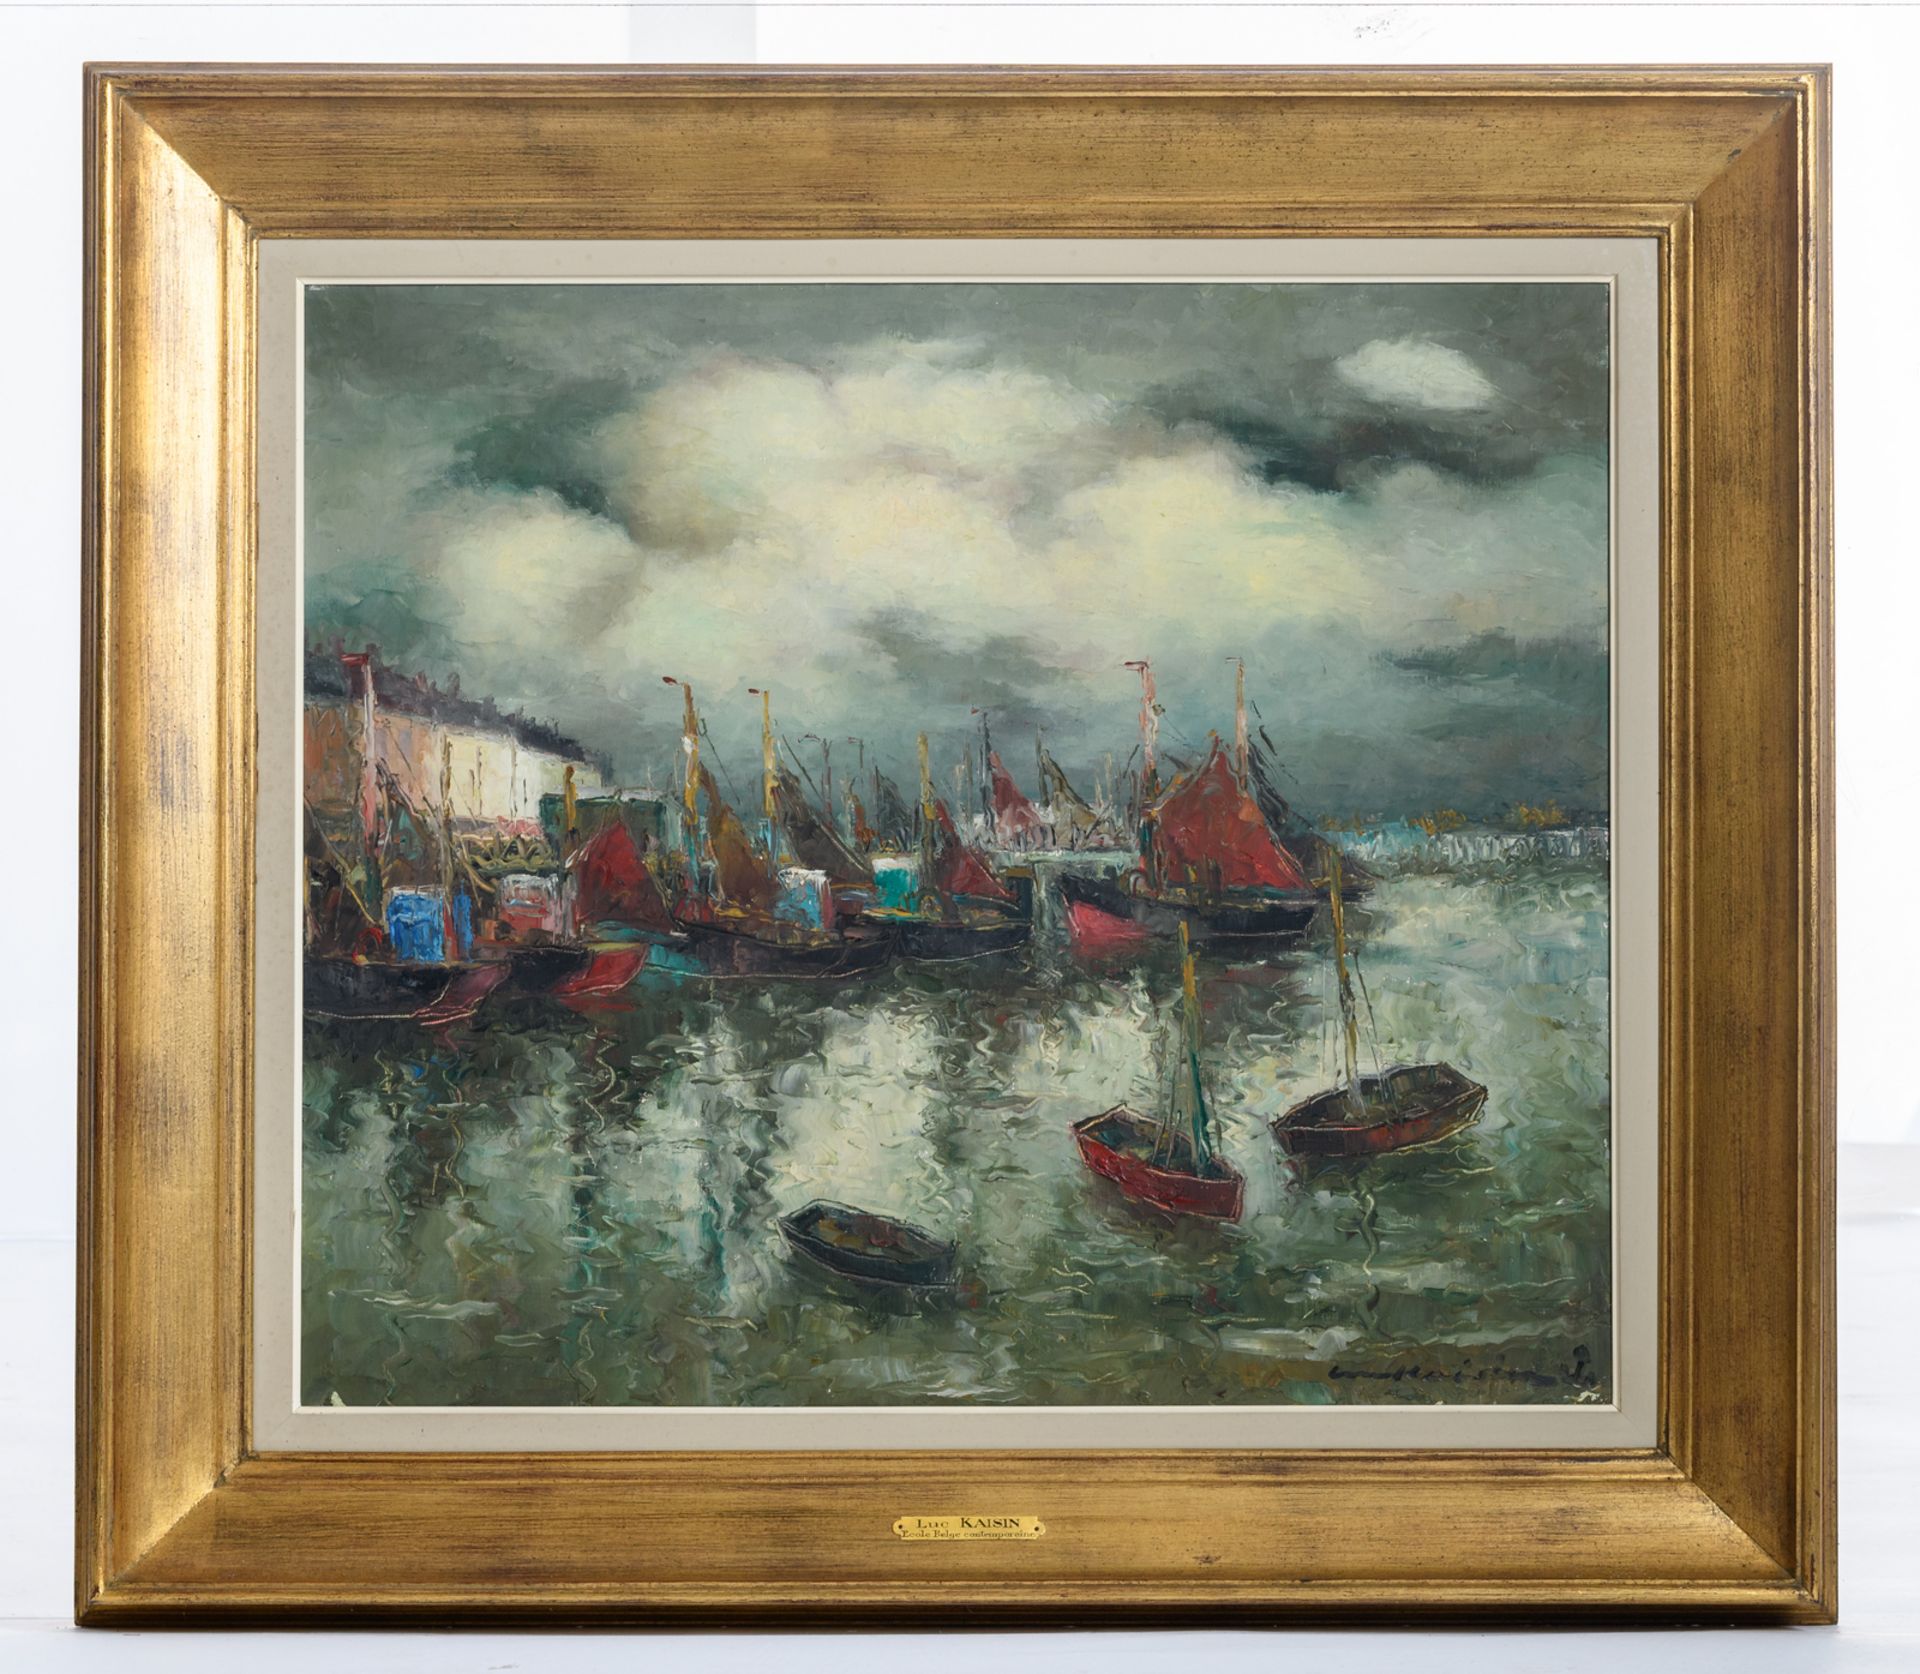 Kaisin L., a harbor view, oil on canvas, 60 x 70 cm - Image 2 of 5